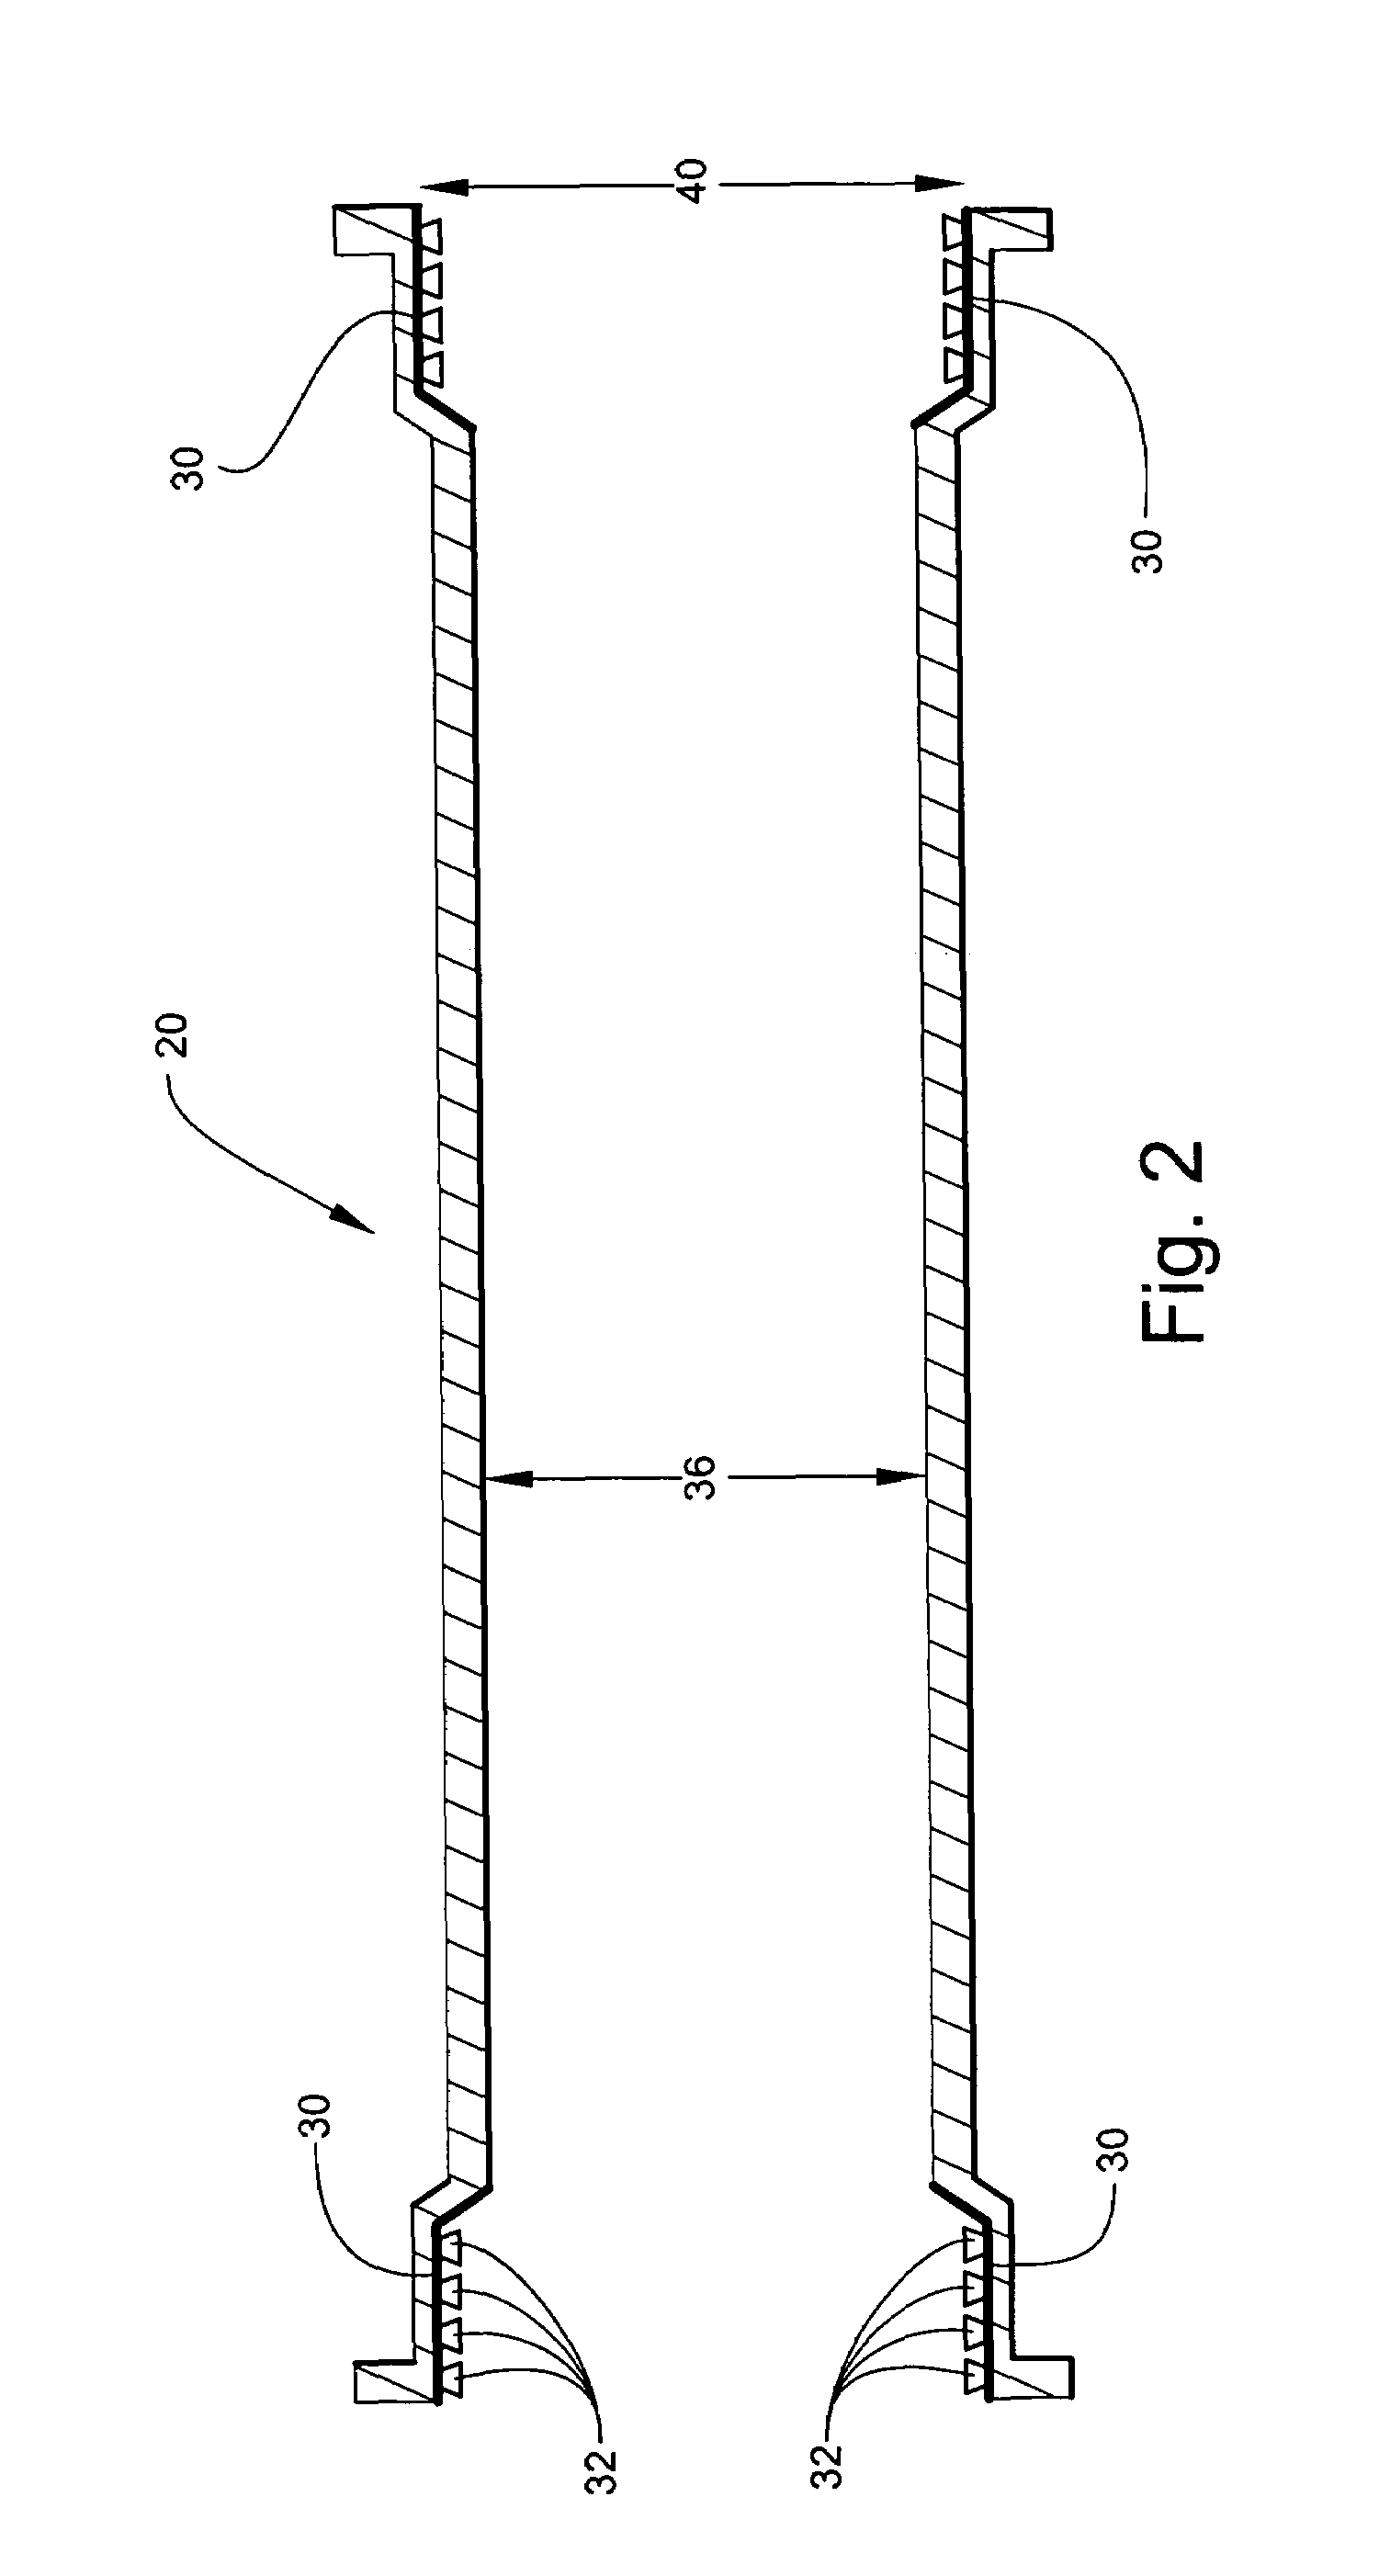 Hollow fiber membrane contactor and method of making same